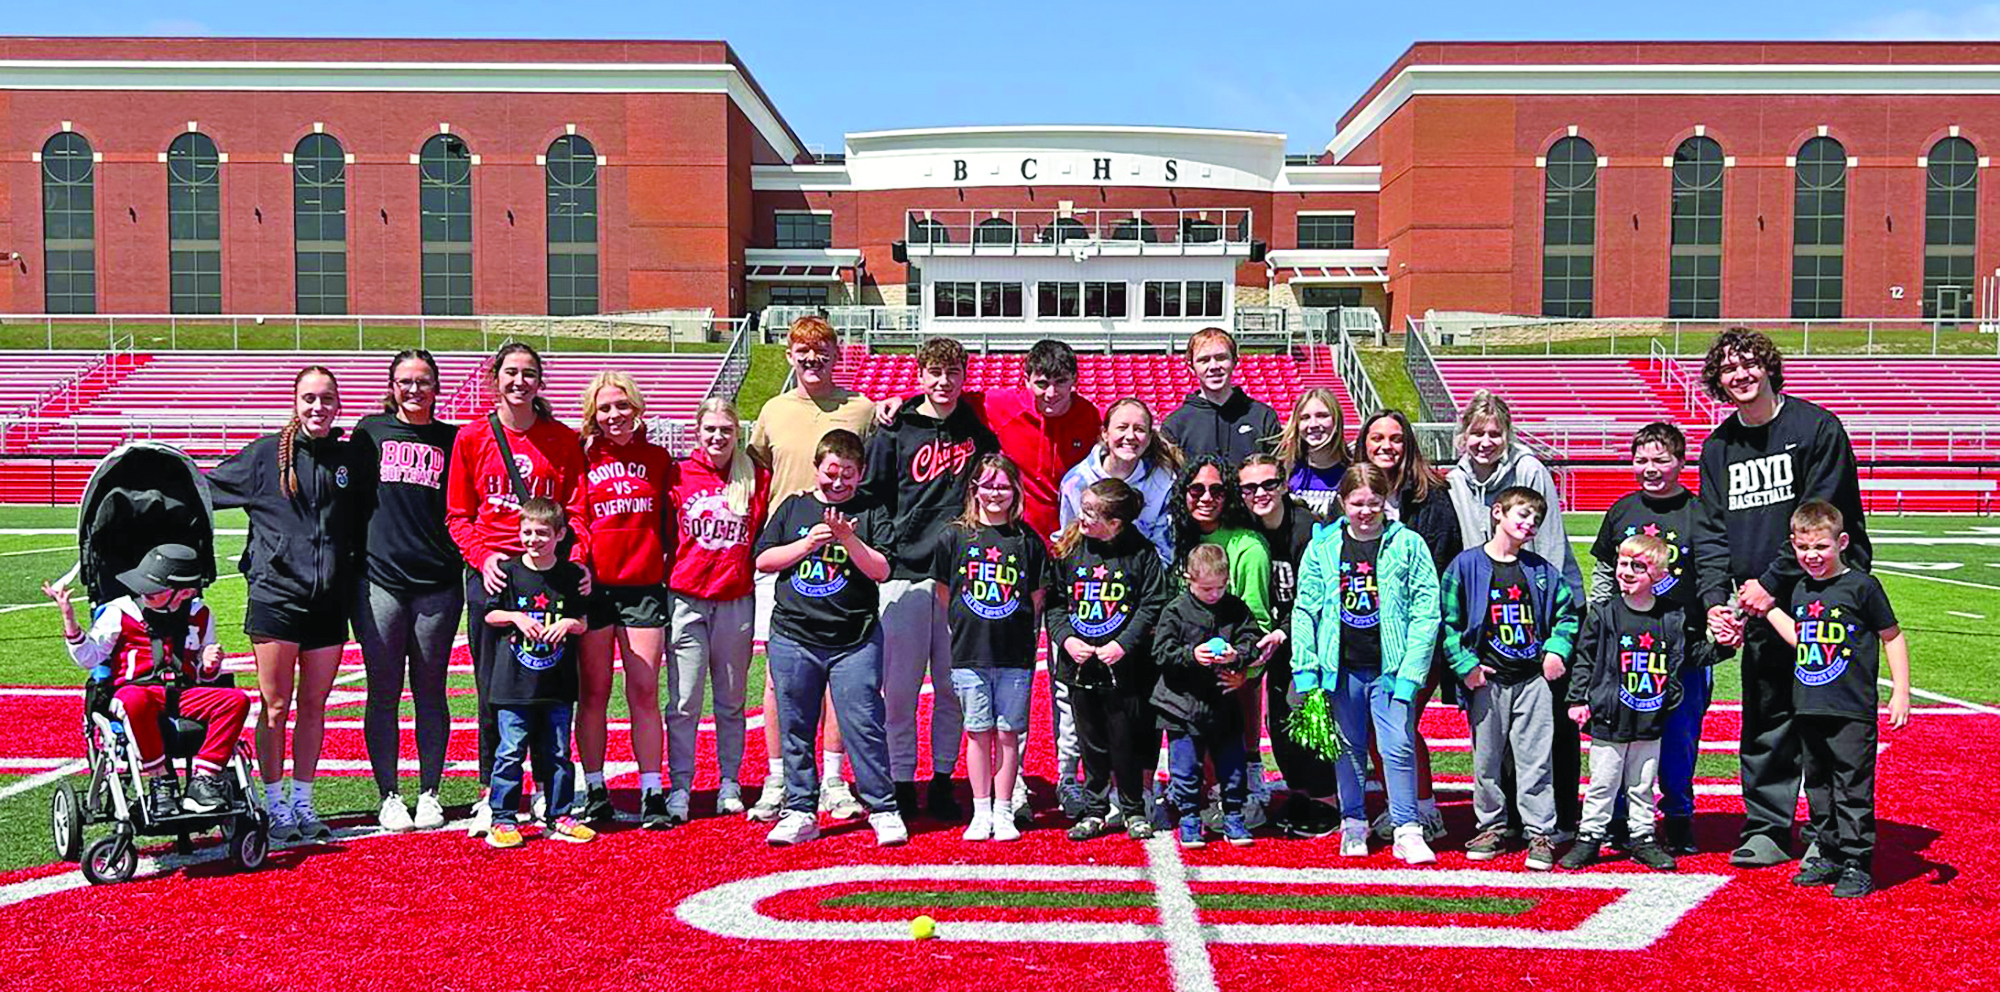 Joy in Every Stride Ashland and Boyd County Schools Held Annual Special Olympics